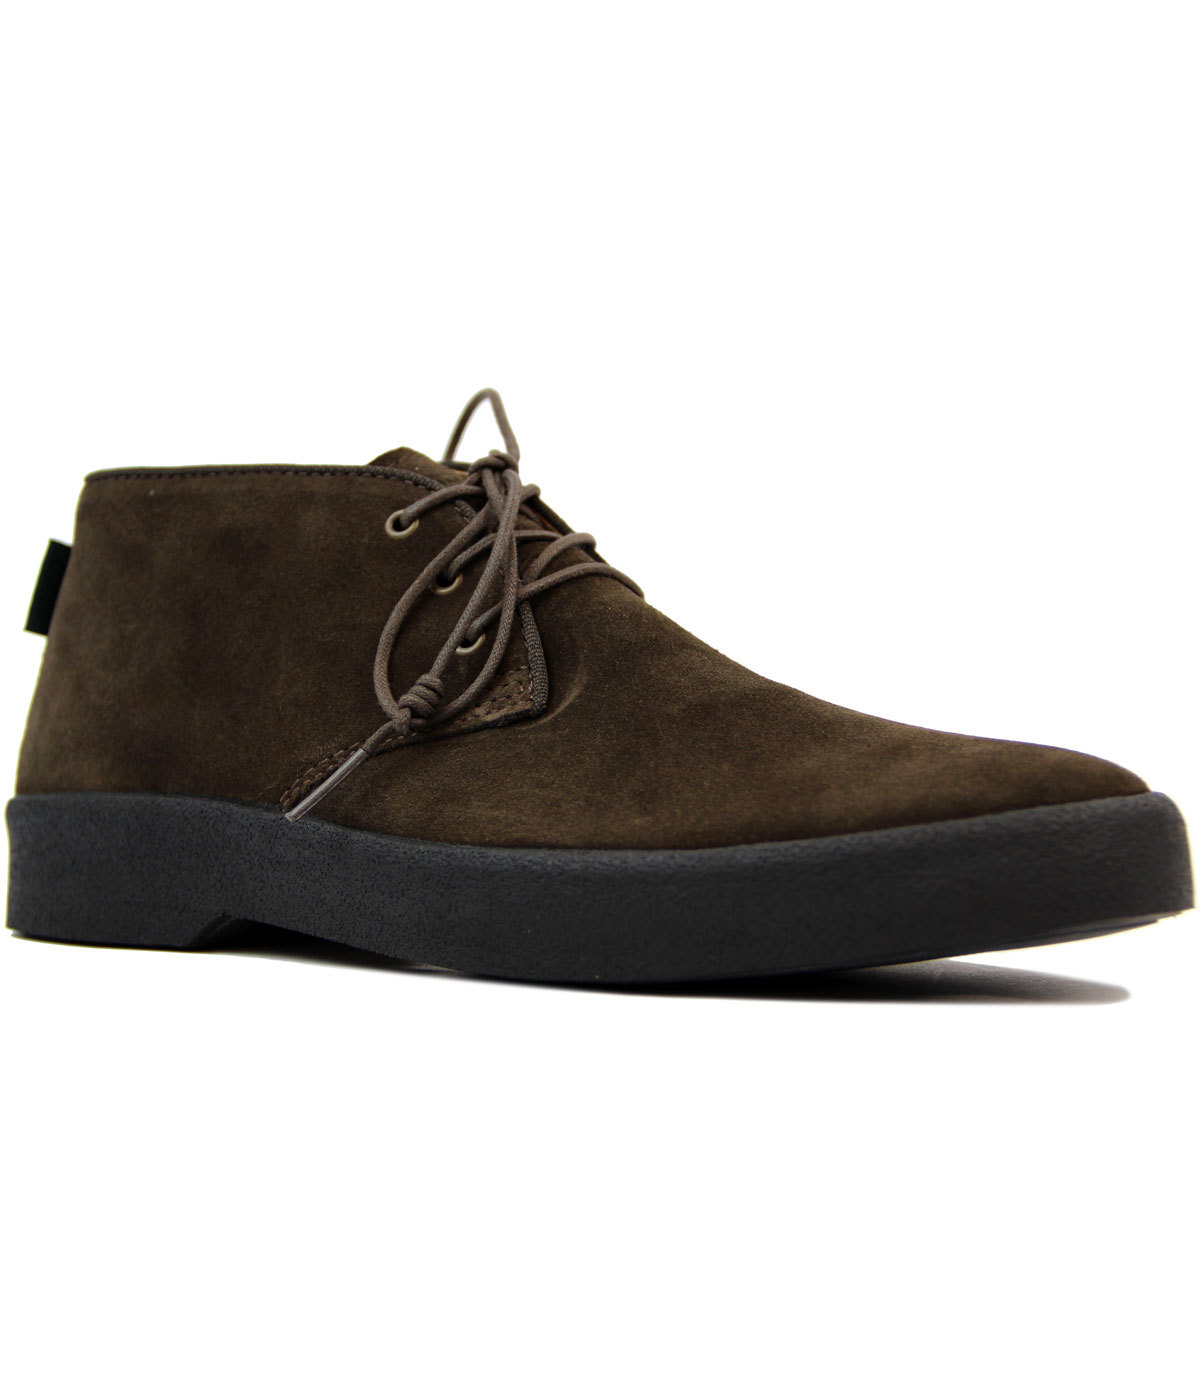 Scholar Stanford BASS WEEJUNS Suede Playboy Boots